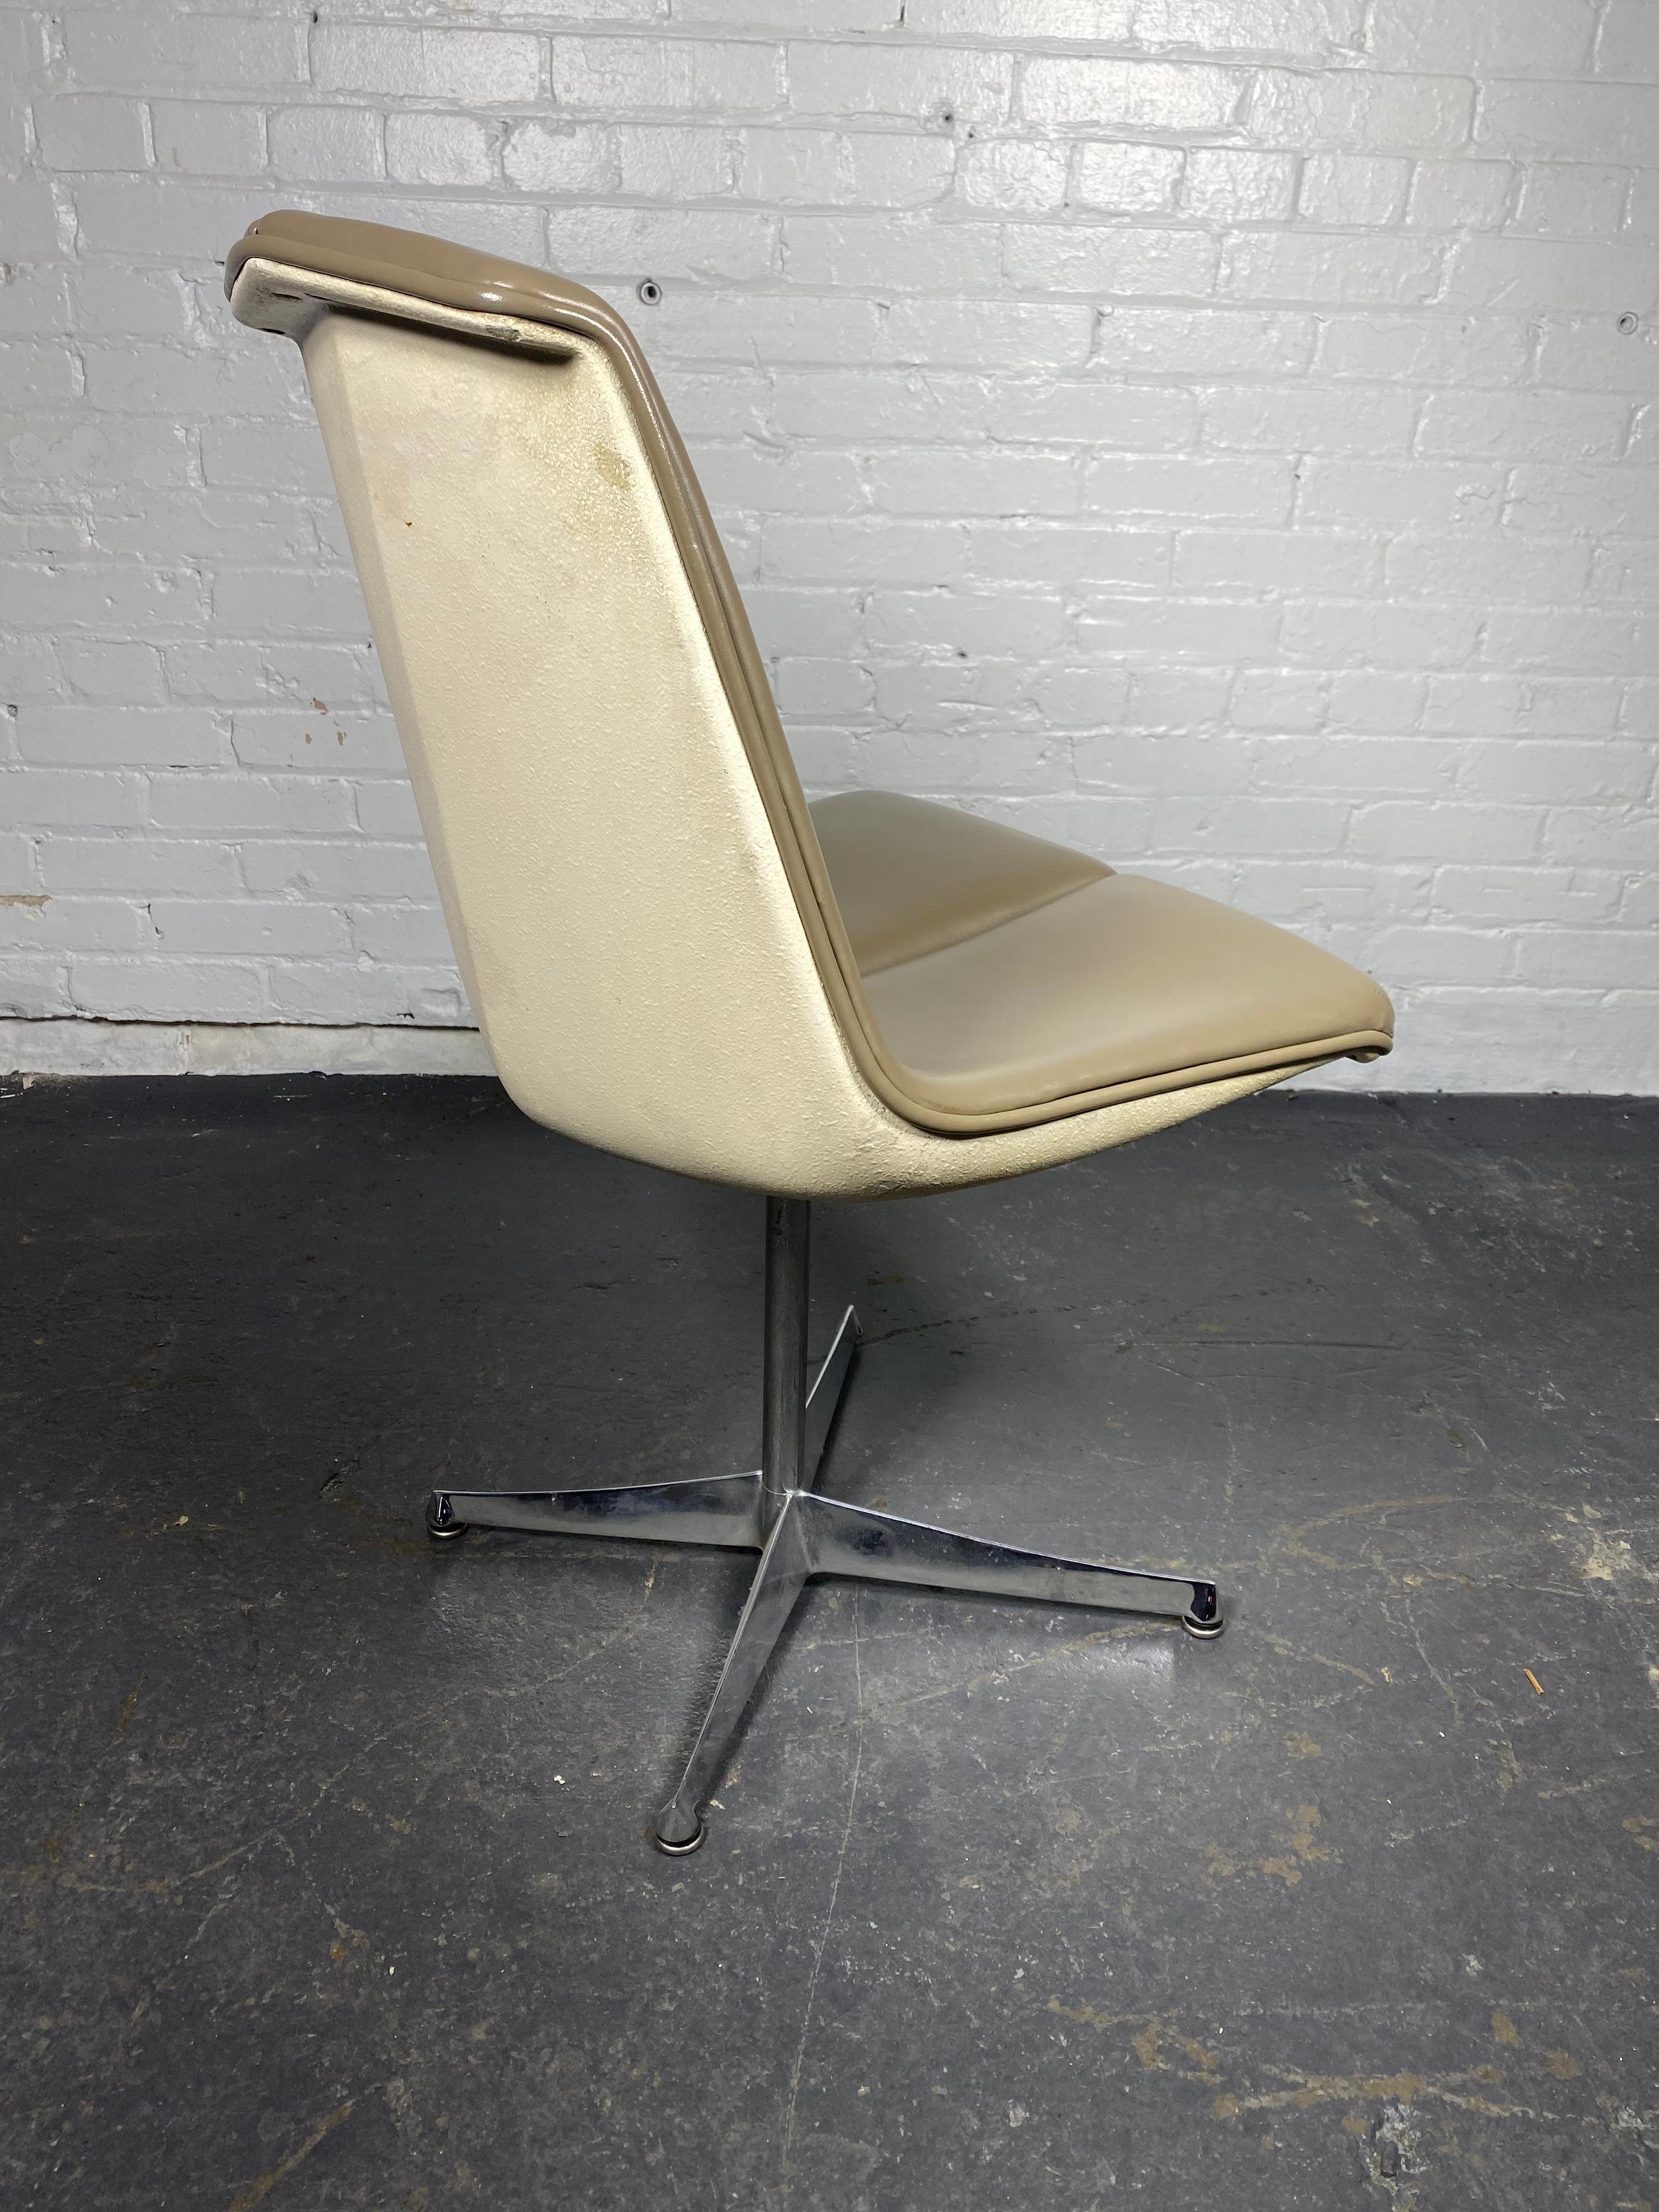 Aluminum Early Richard Schultz for Knoll Side Desk Chair..early Knoll label